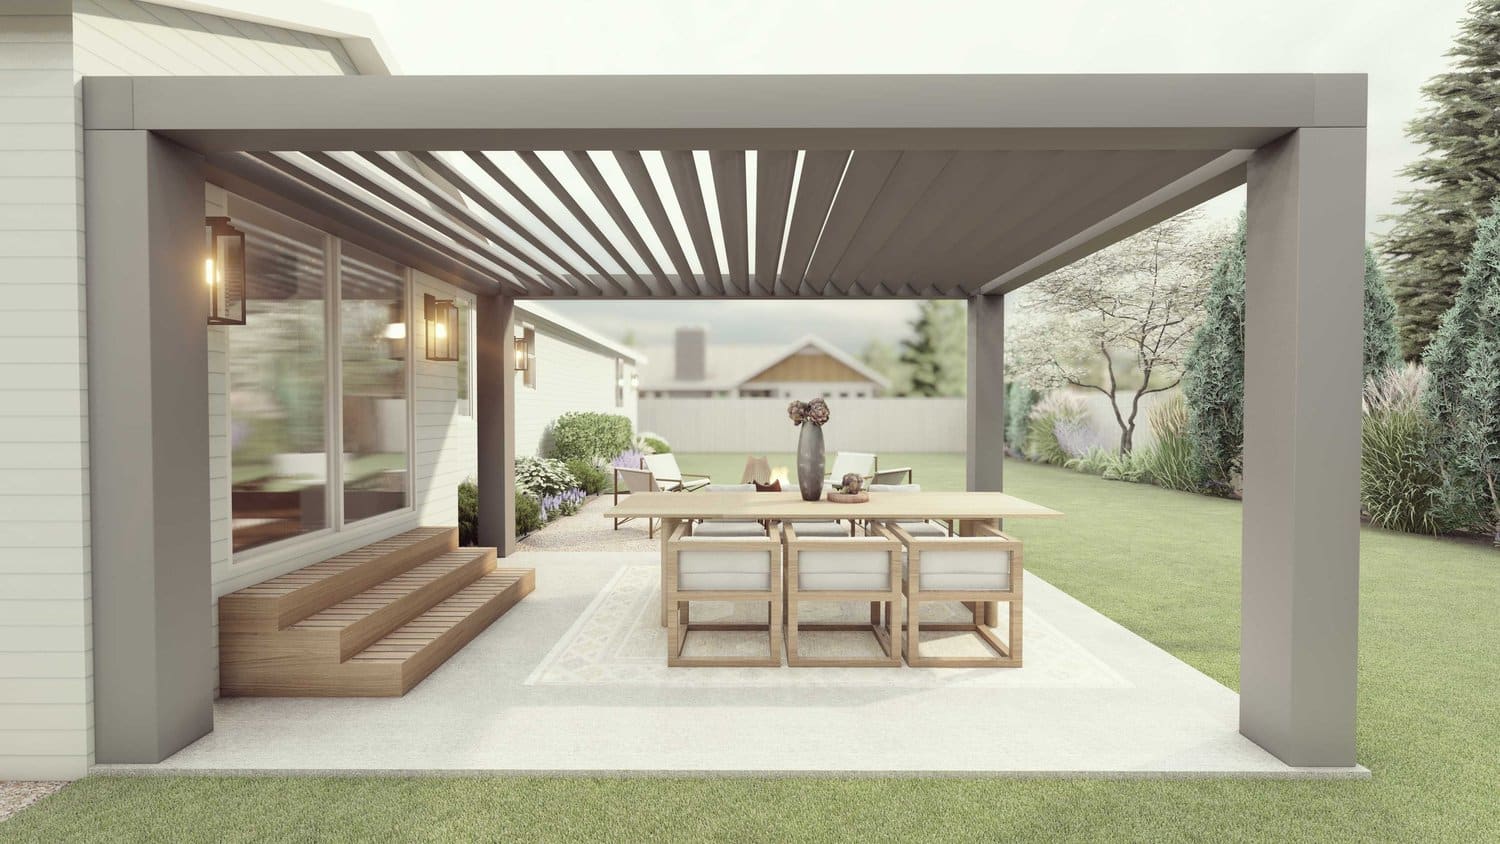 Twin Falls backyard with concrete paver patio and a pergola over dining area